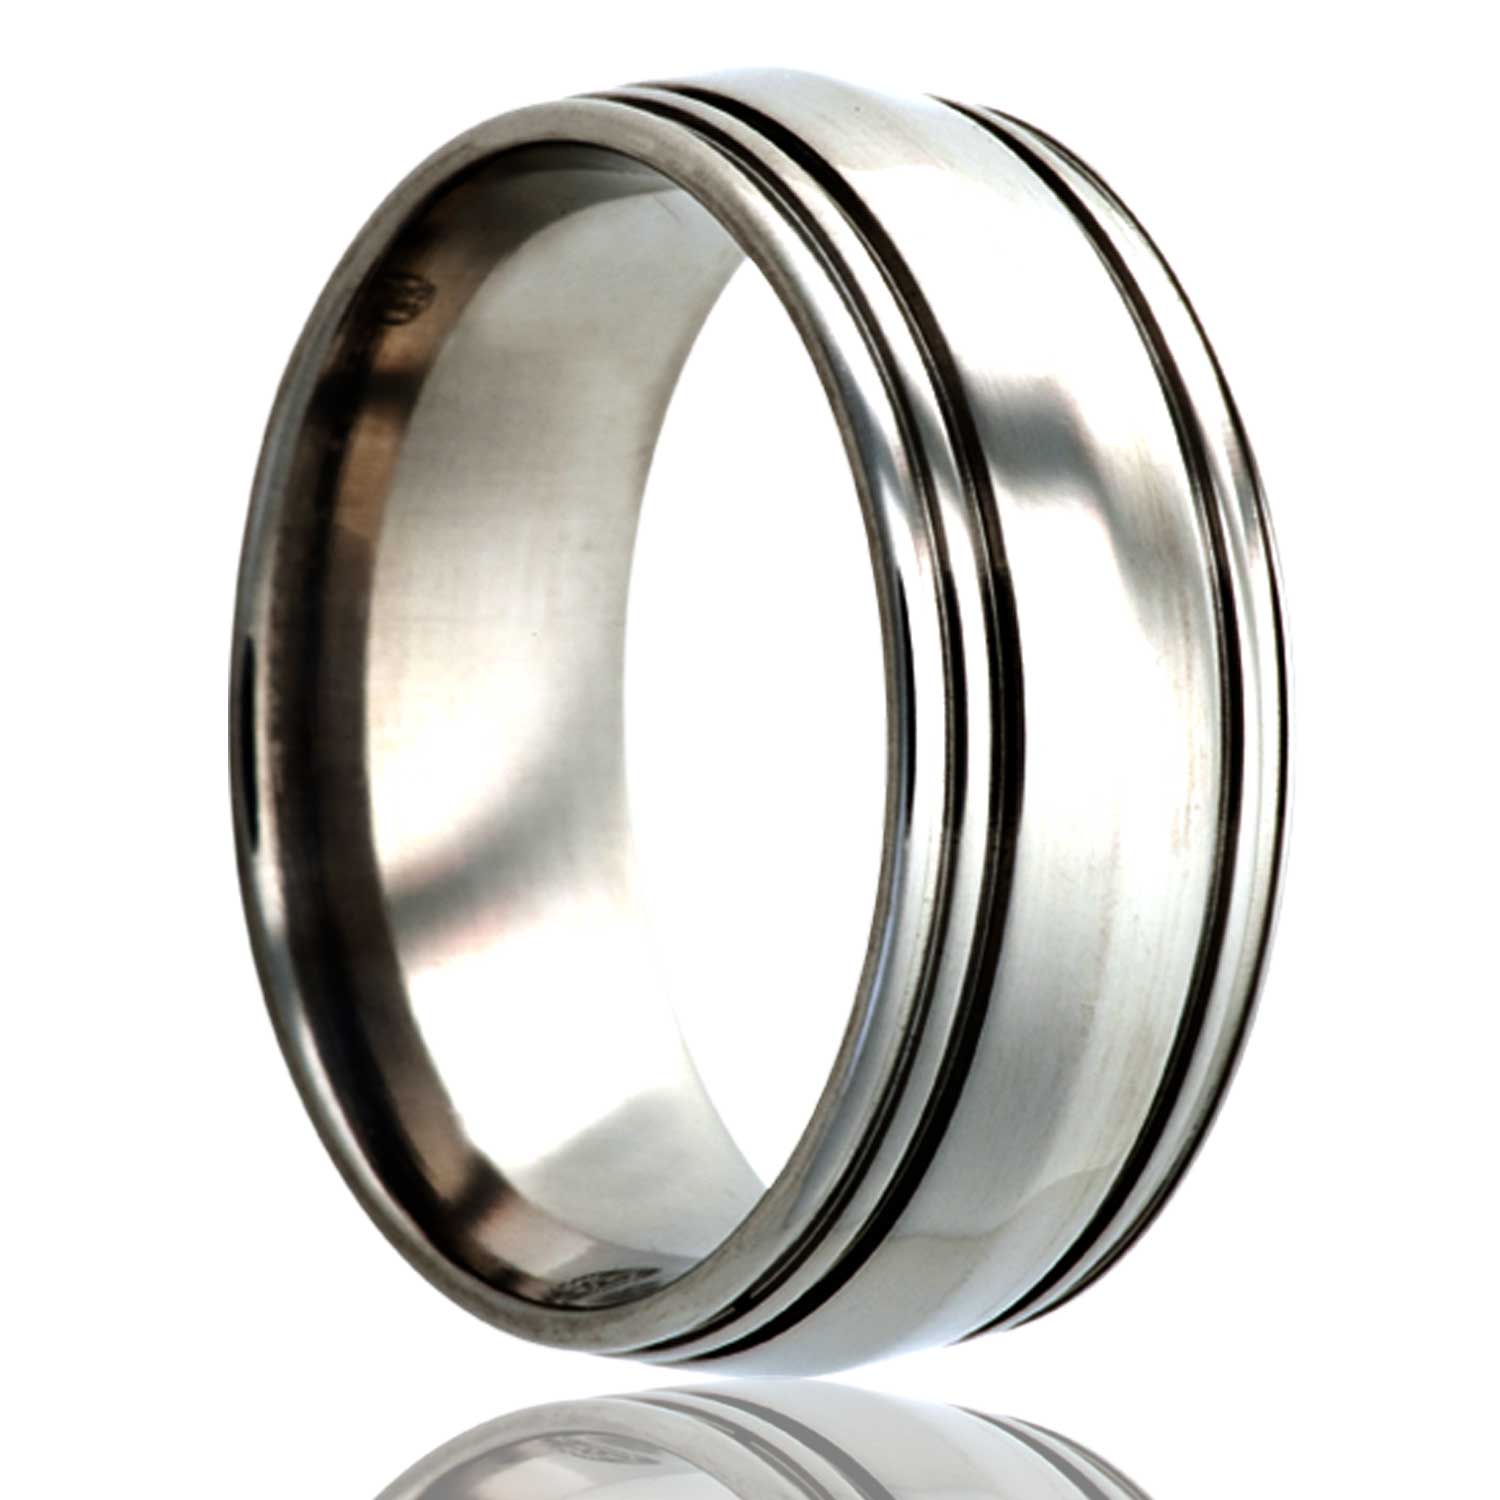 A grooved titanium wedding band displayed on a neutral white background.